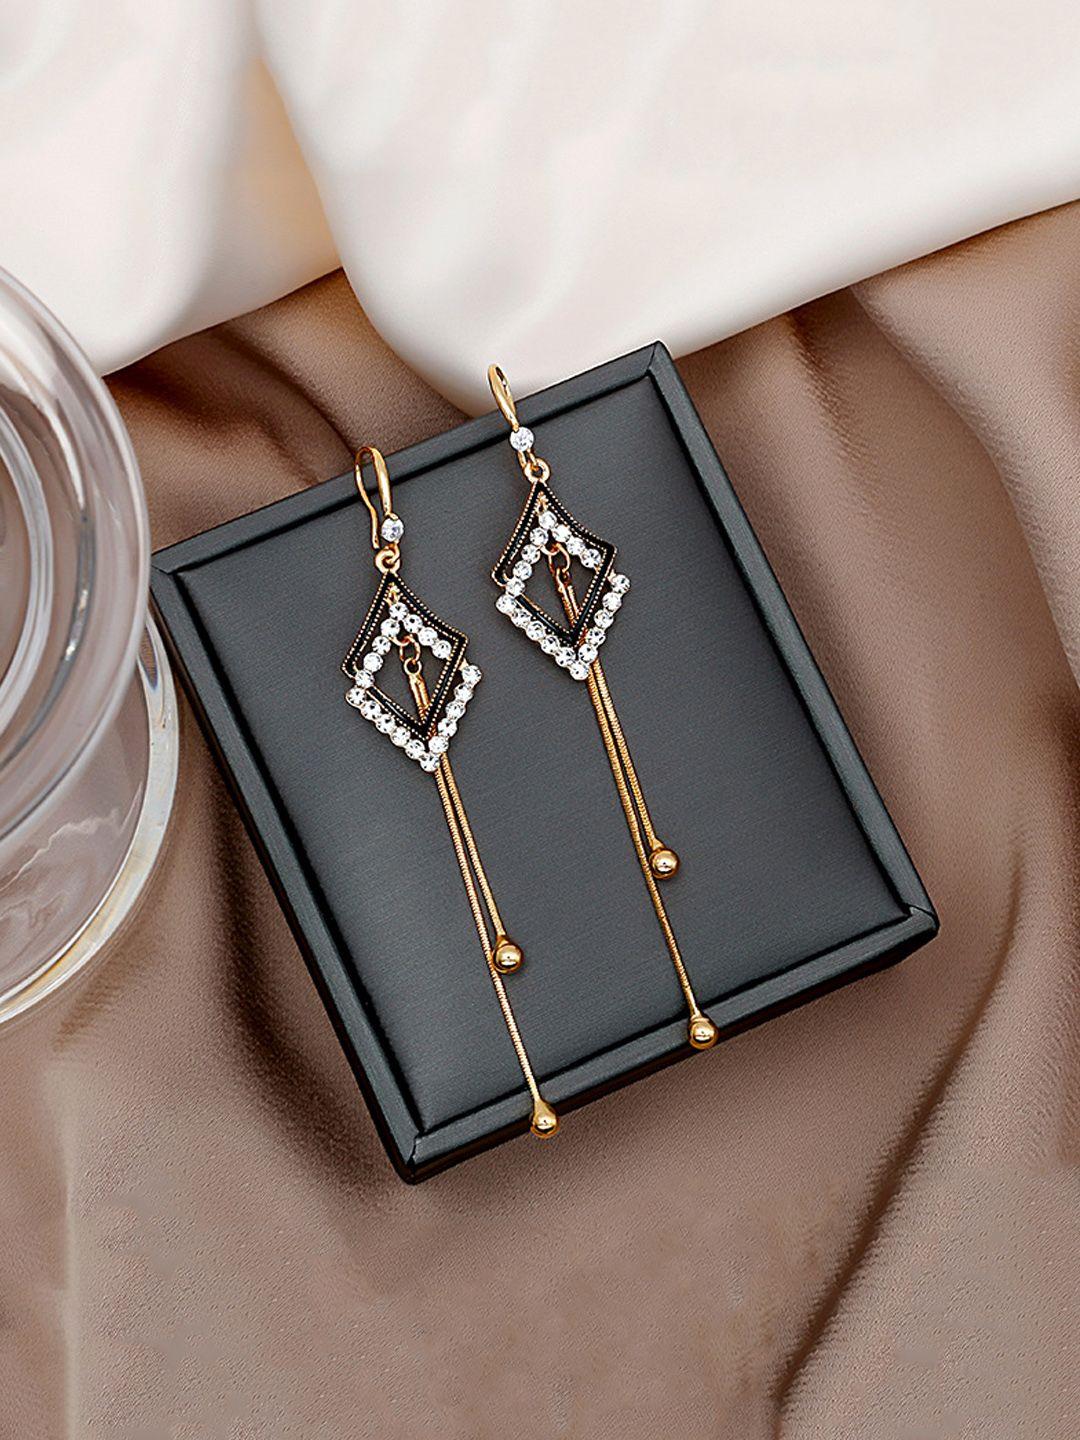 unwind by yellow chimes gold-toned contemporary drop earrings